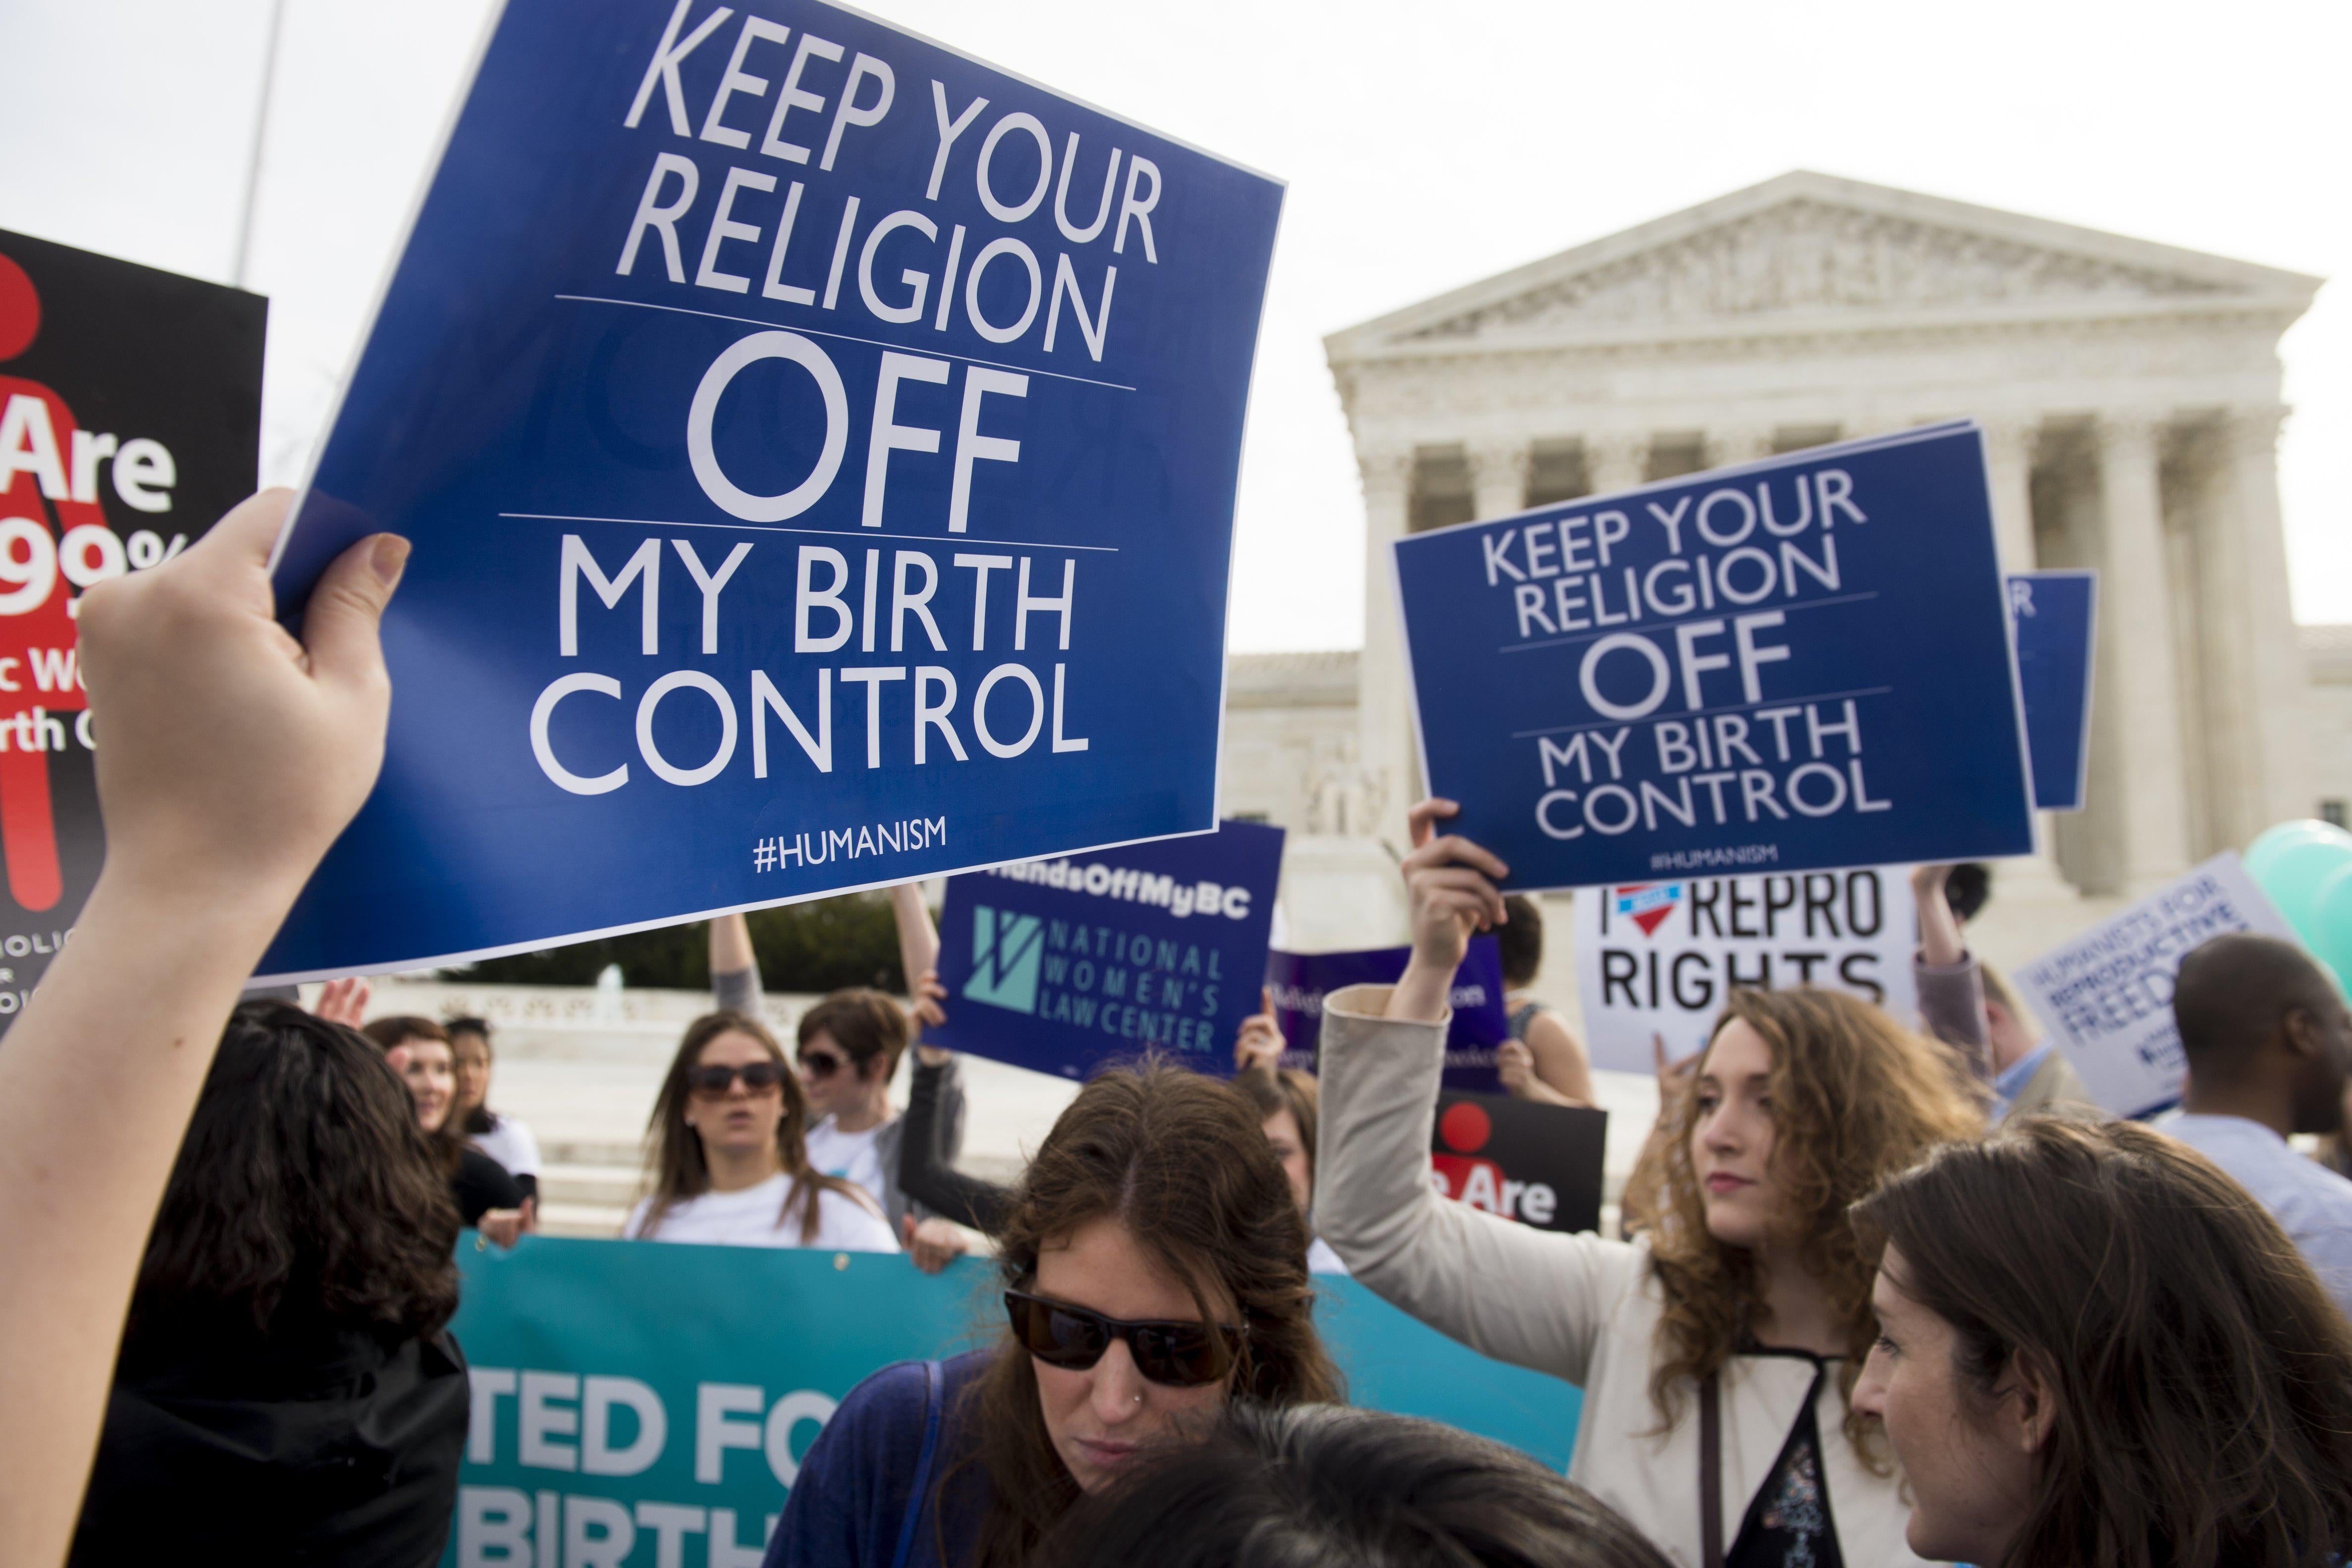 Protesters in front of the Supreme Court hold signs that read "Keep Your Religion OFF My Birth Control."